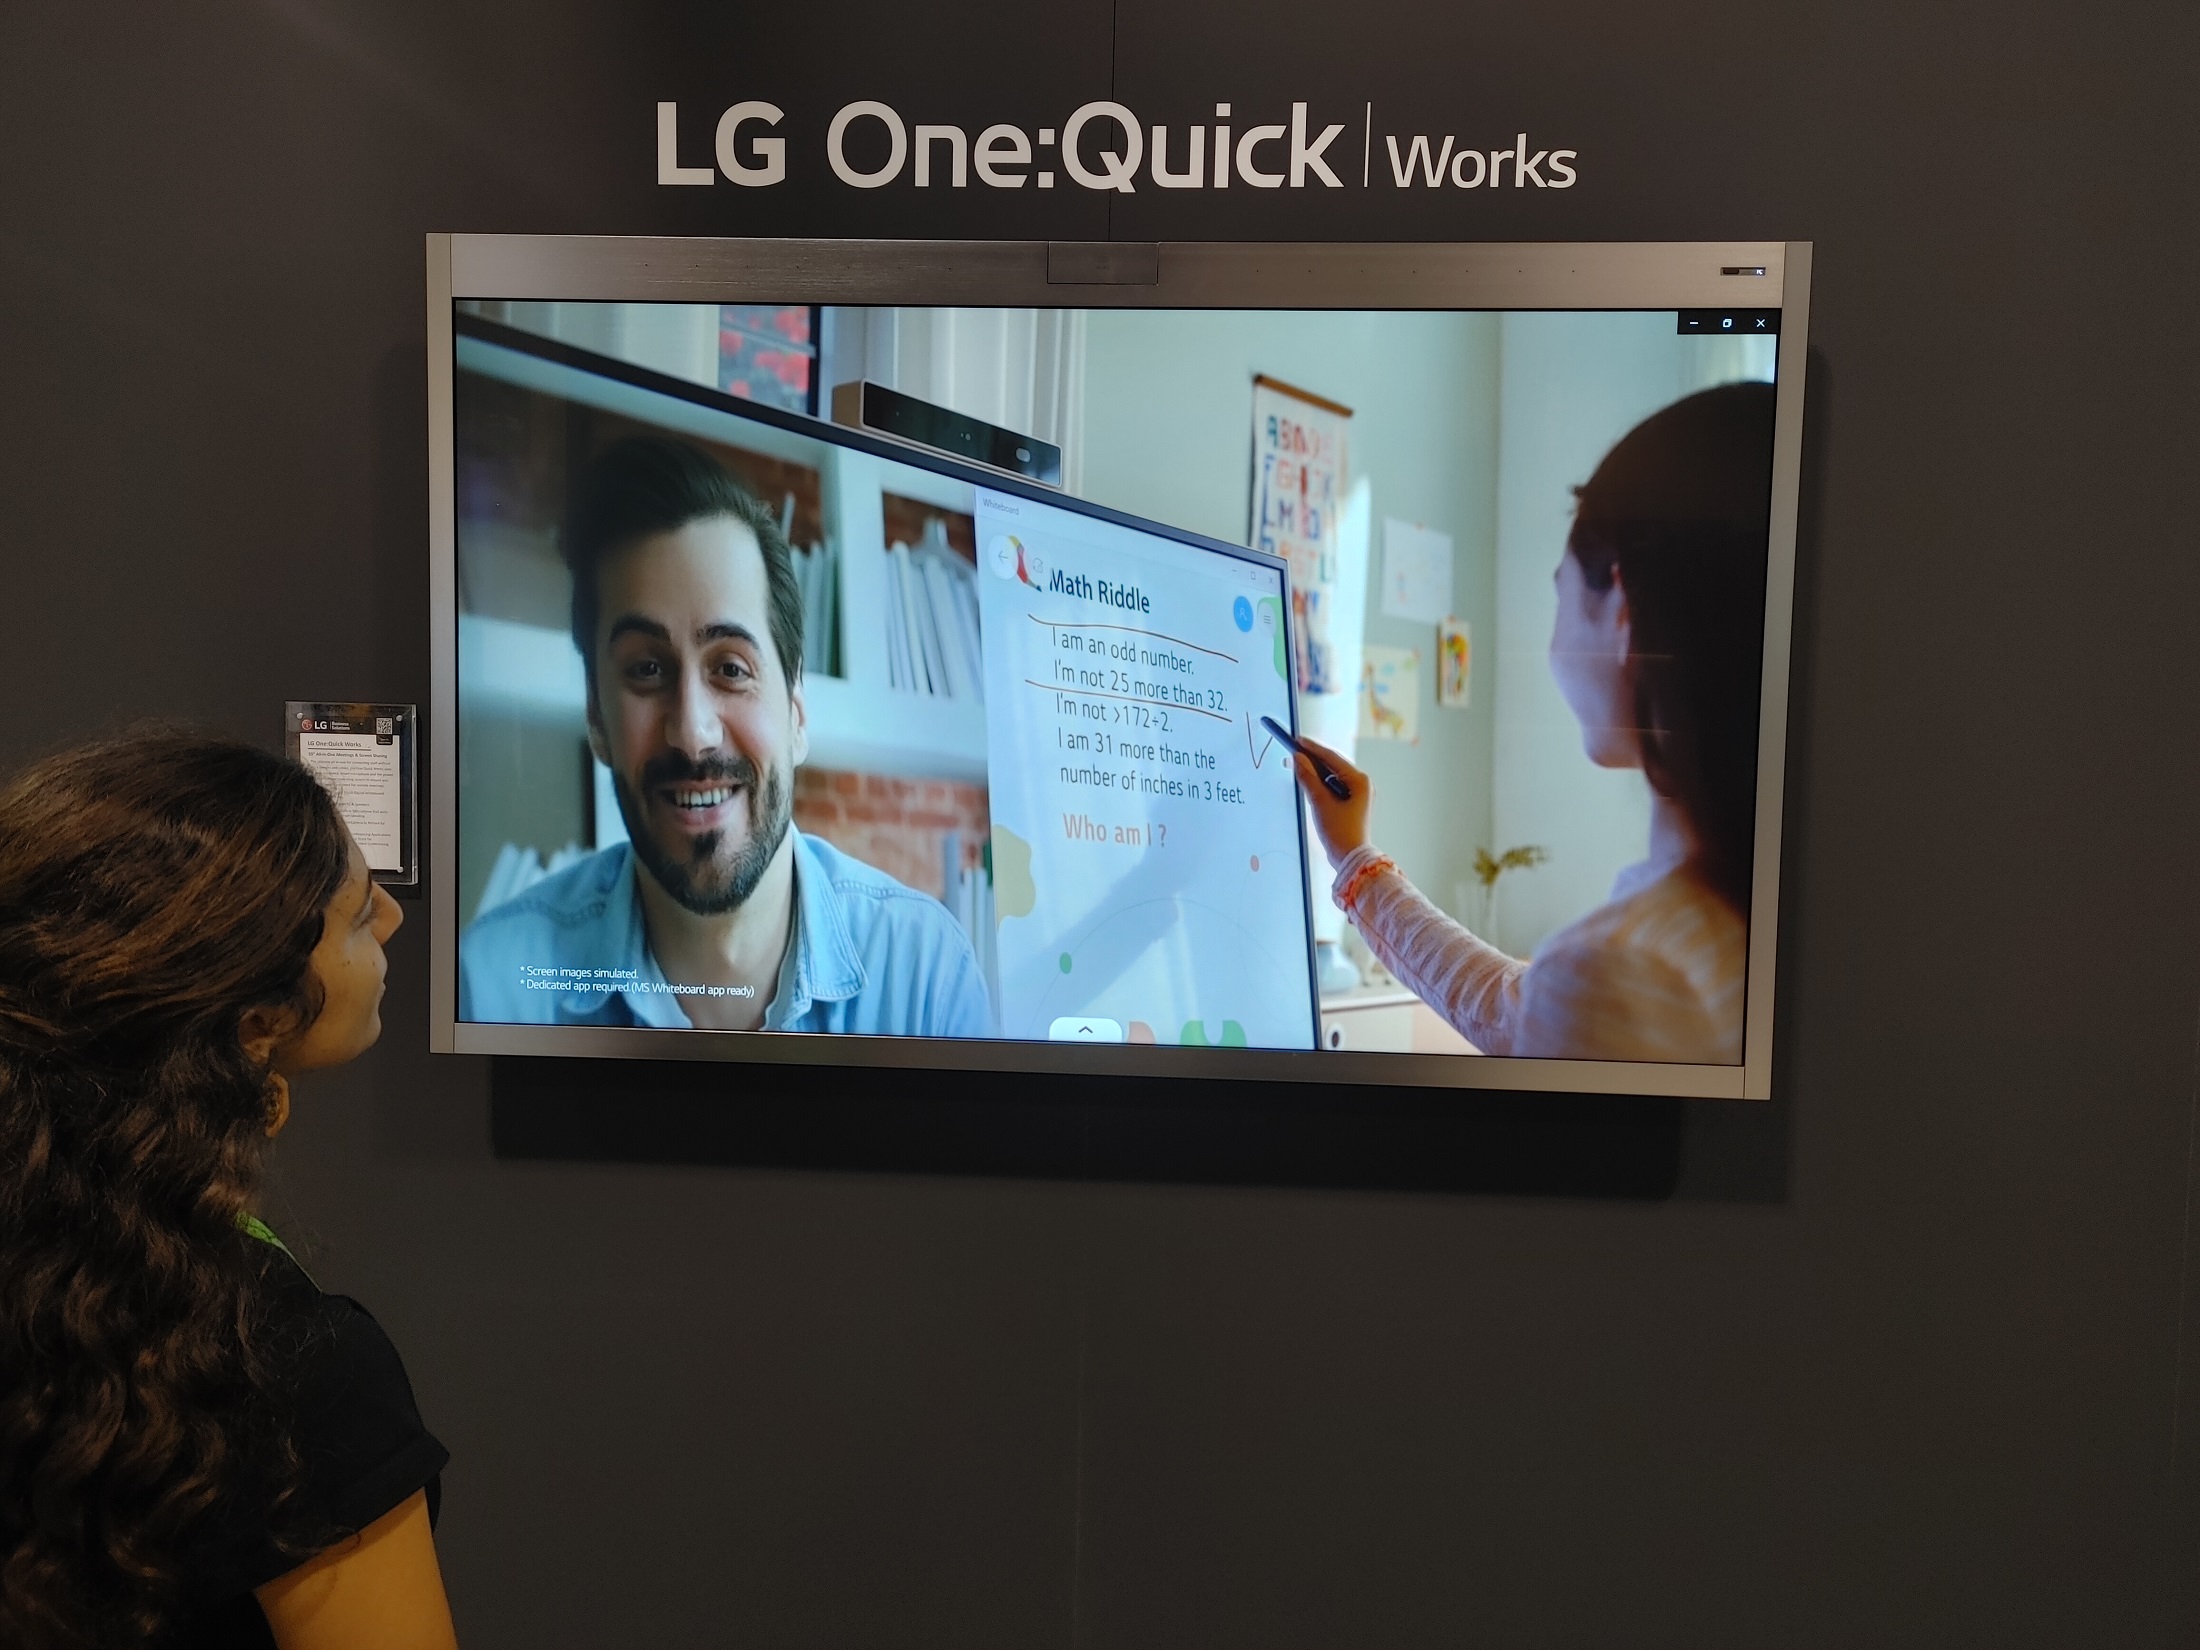 A visitor enjoying a first-hand experience of LG One:Quick Works